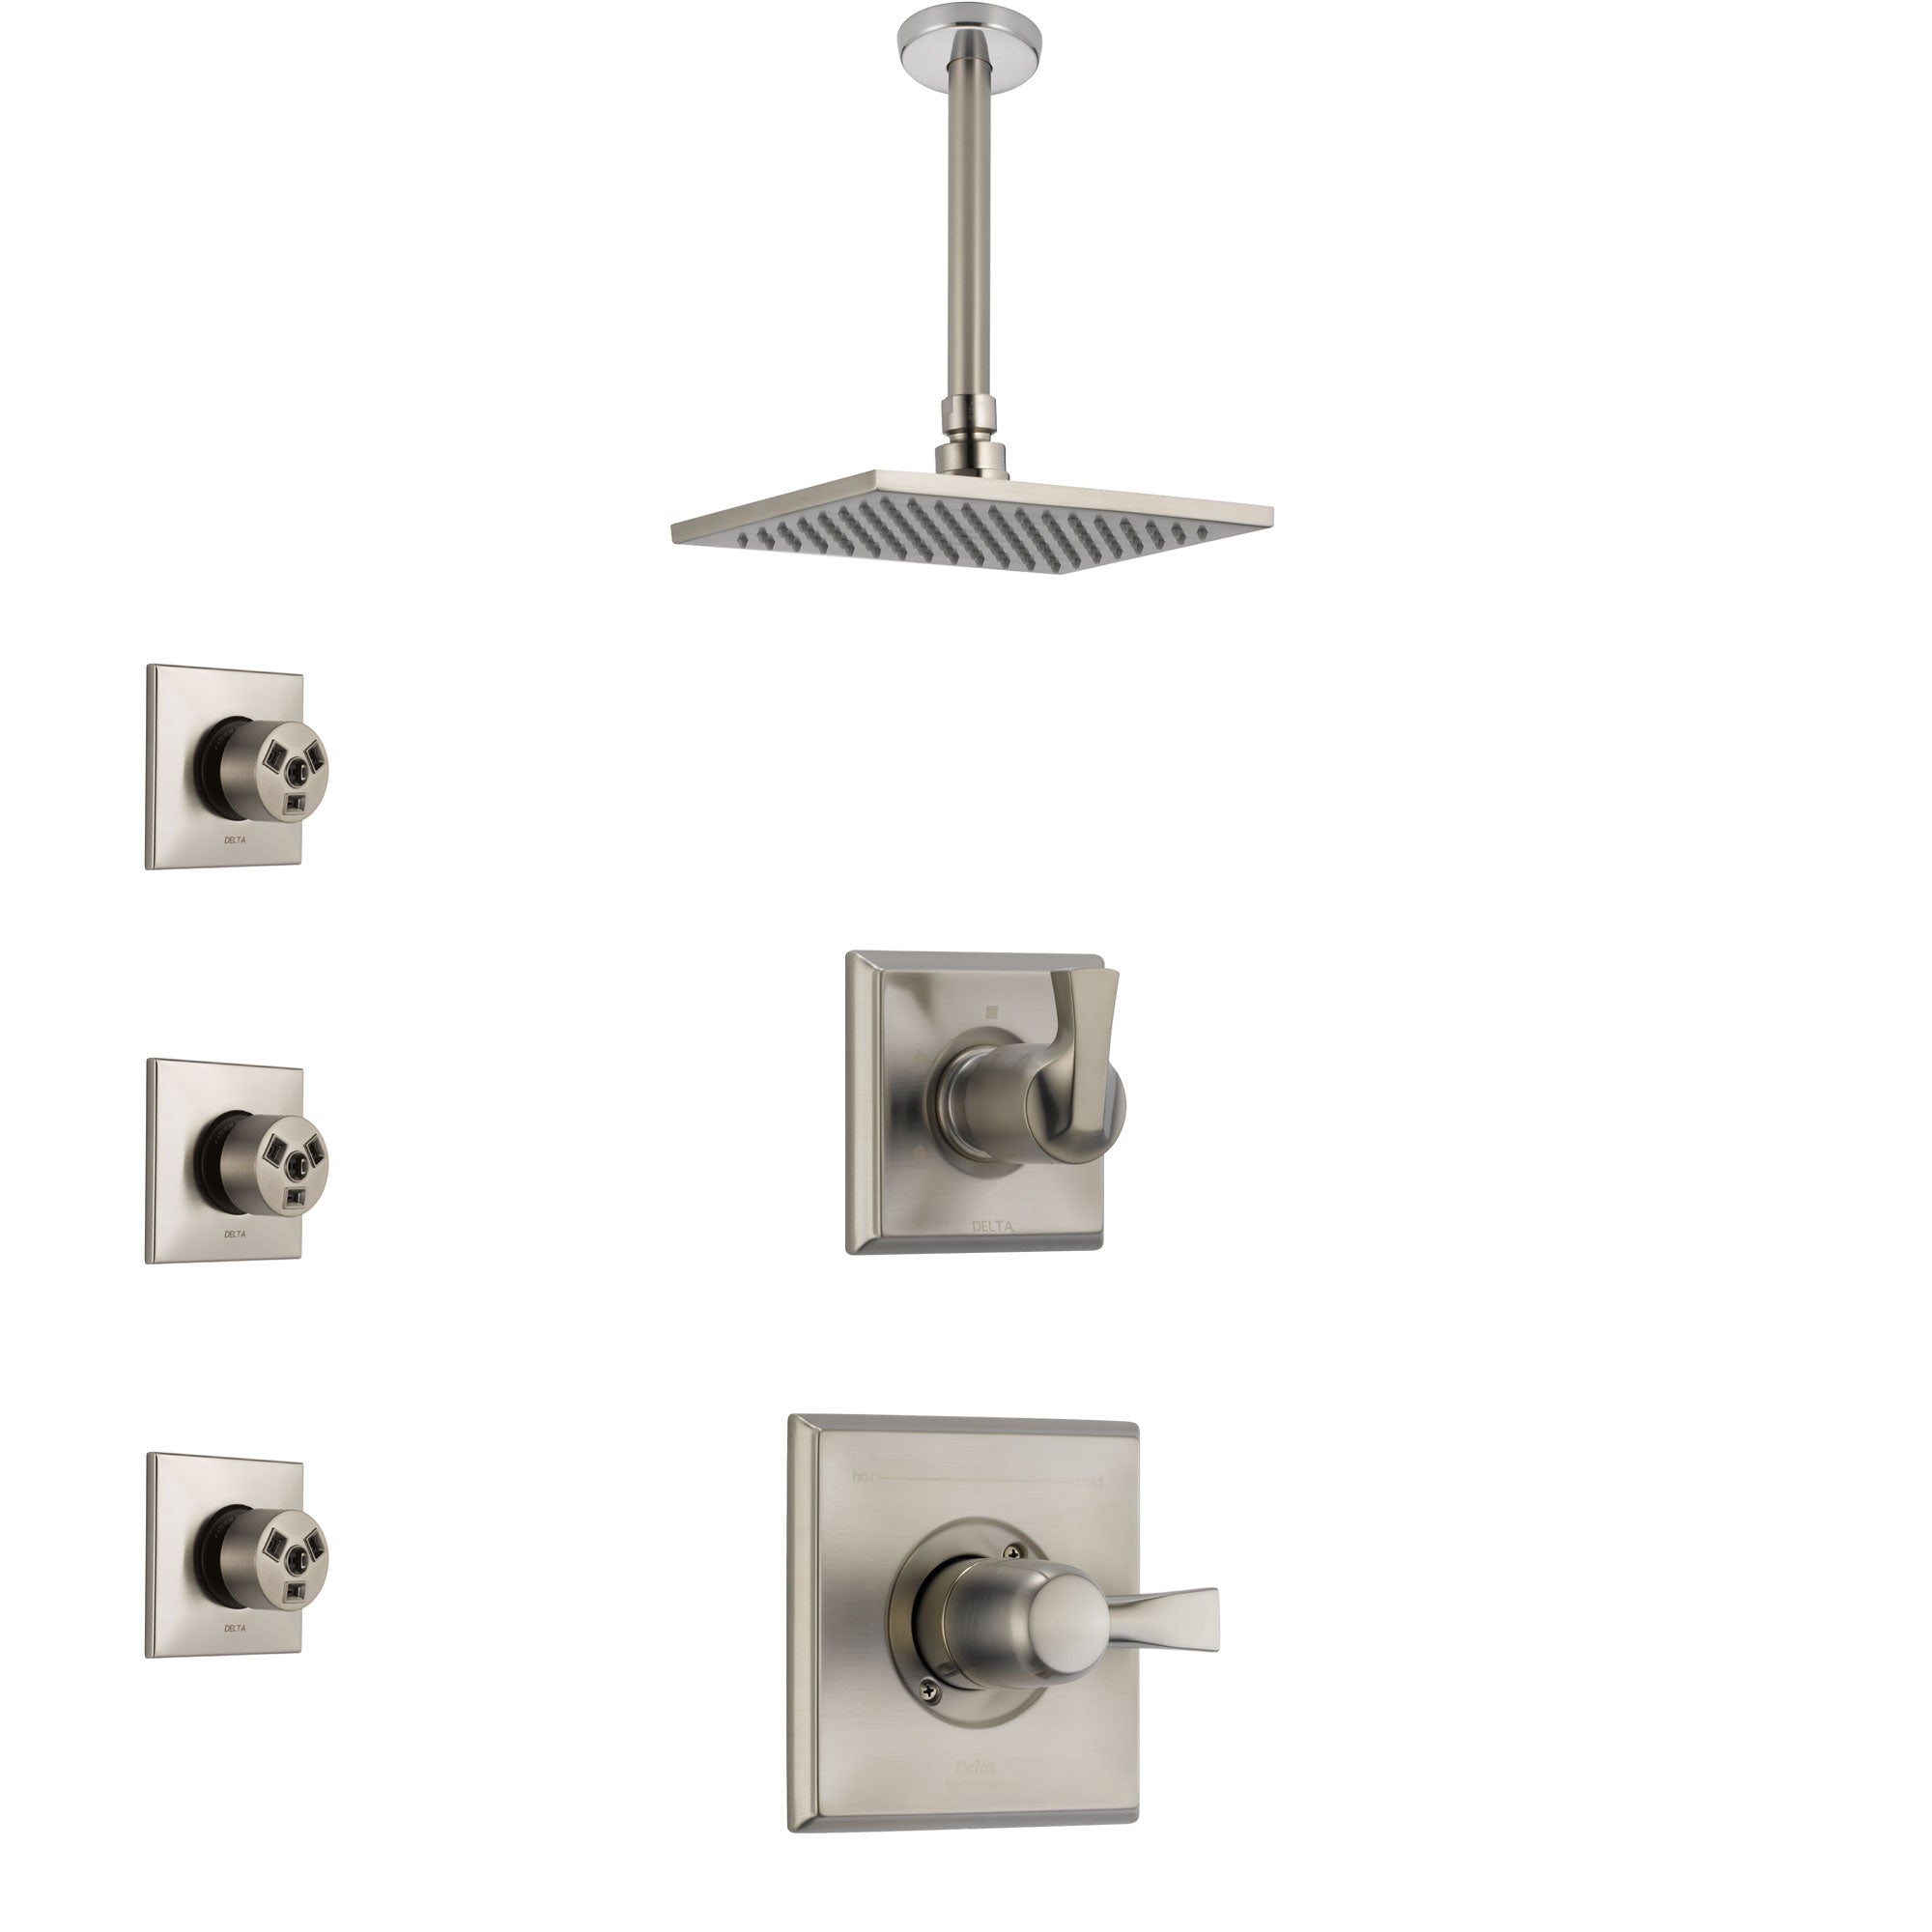 Delta Dryden Stainless Steel Finish Shower System with Control Handle, 3-Setting Diverter, Ceiling Mount Showerhead, and 3 Body Sprays SS1451SS7